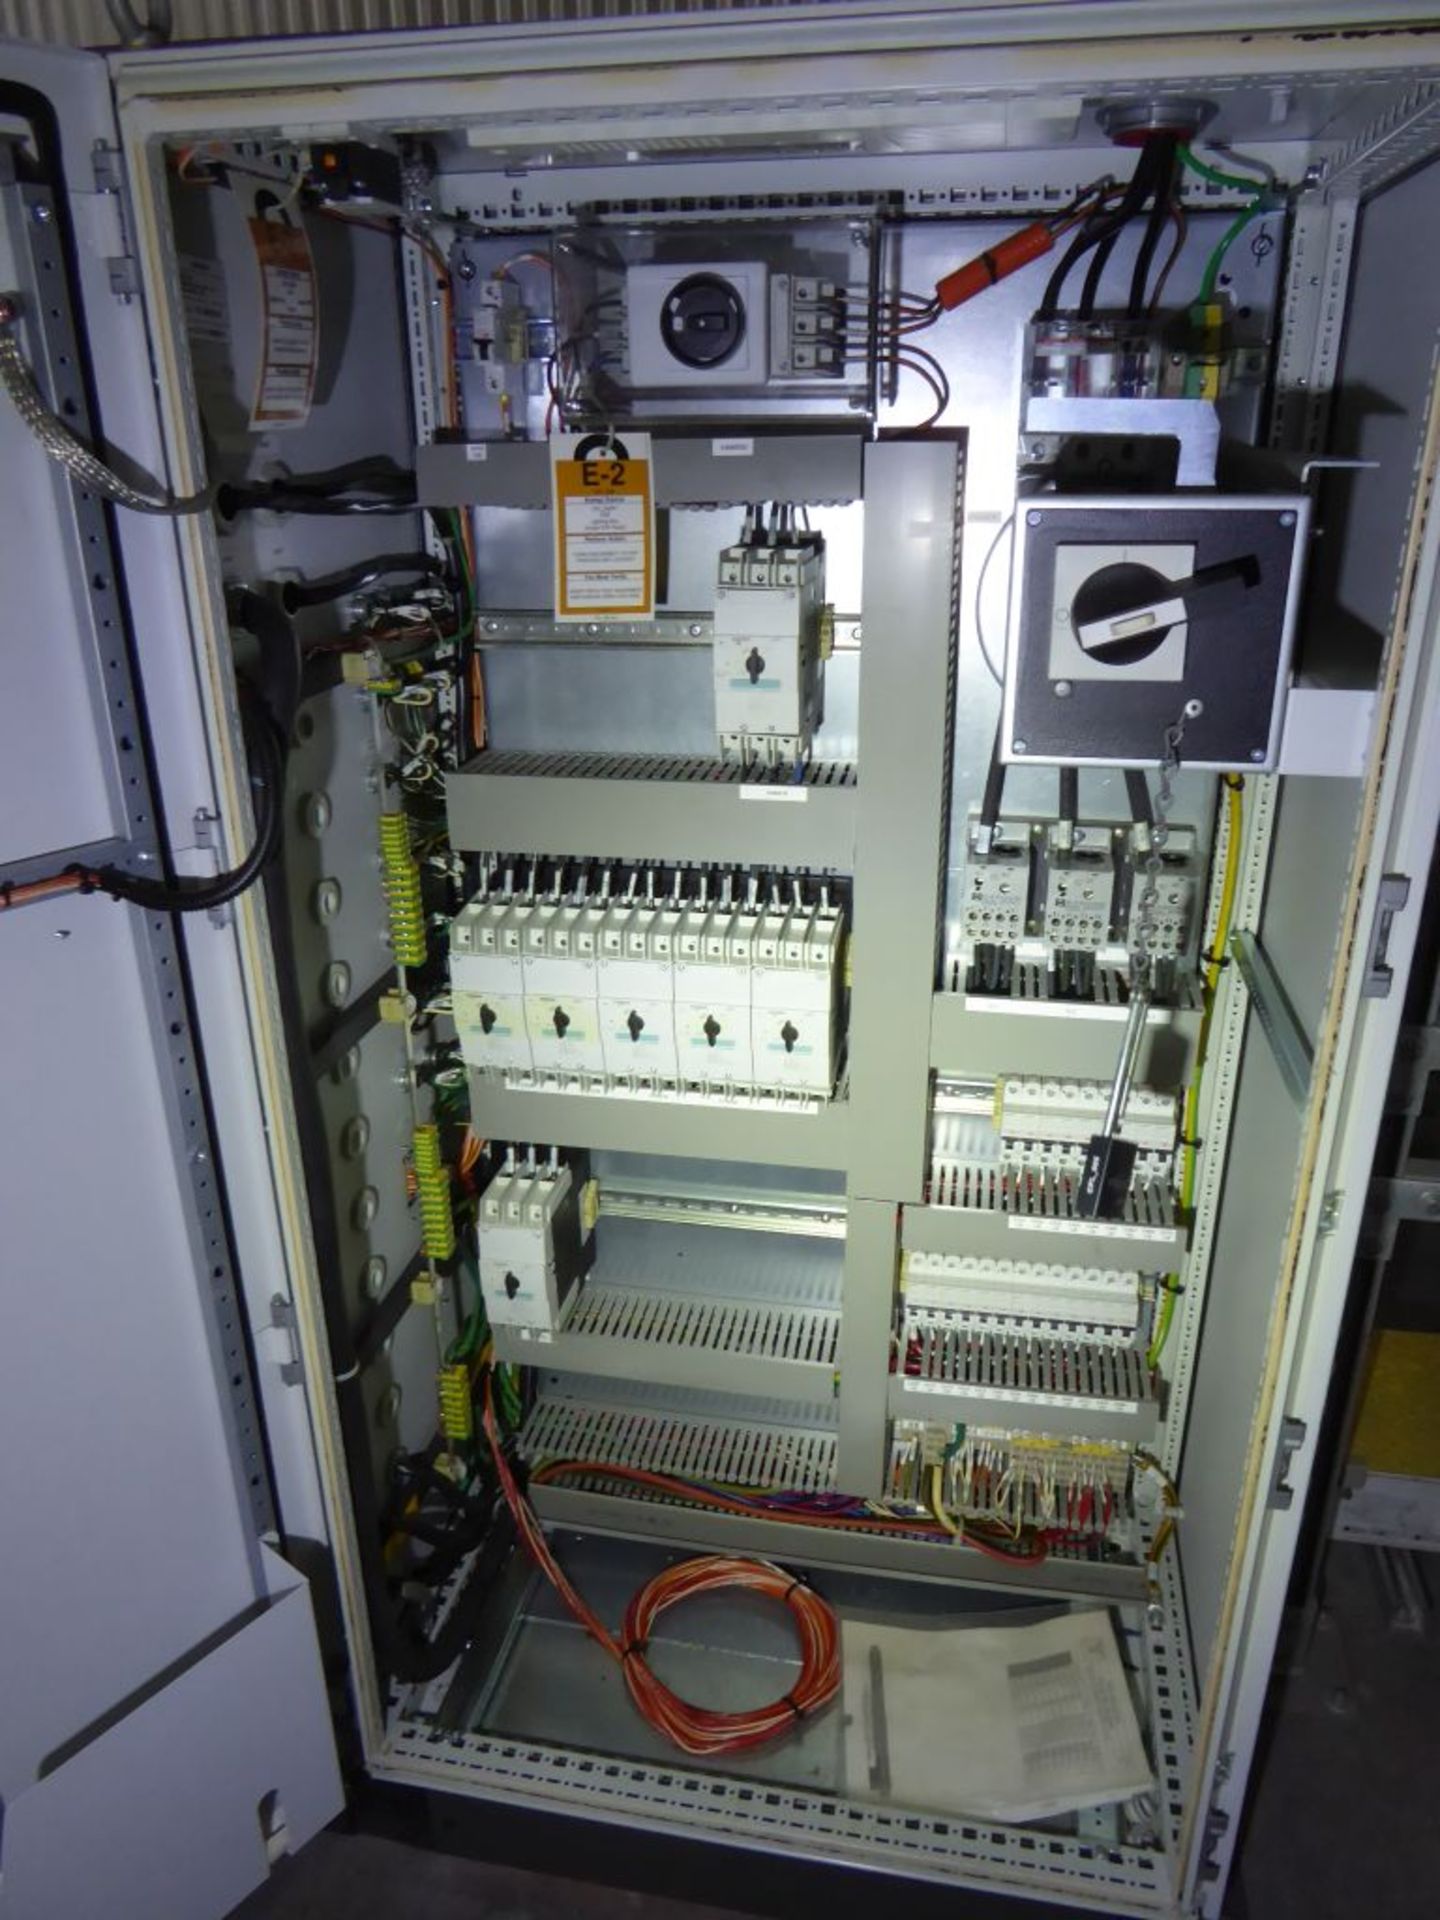 Control Panel with Contents